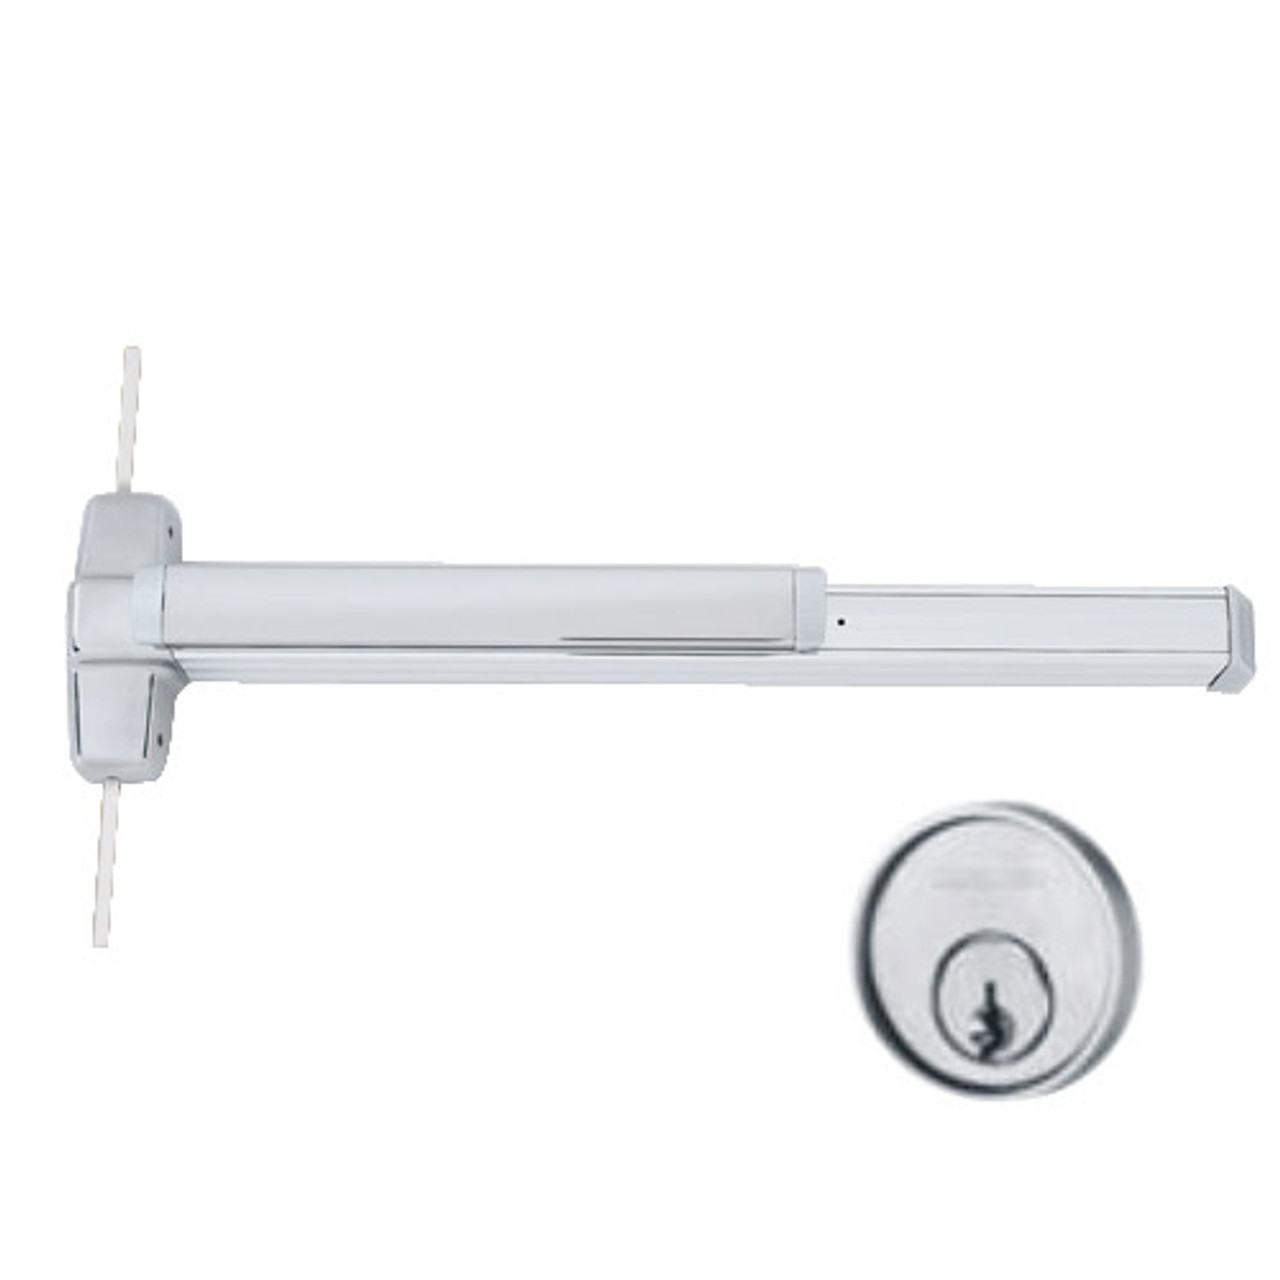 9827NL-OP-F-US28-4 Von Duprin Exit Device in Anodized Aluminum